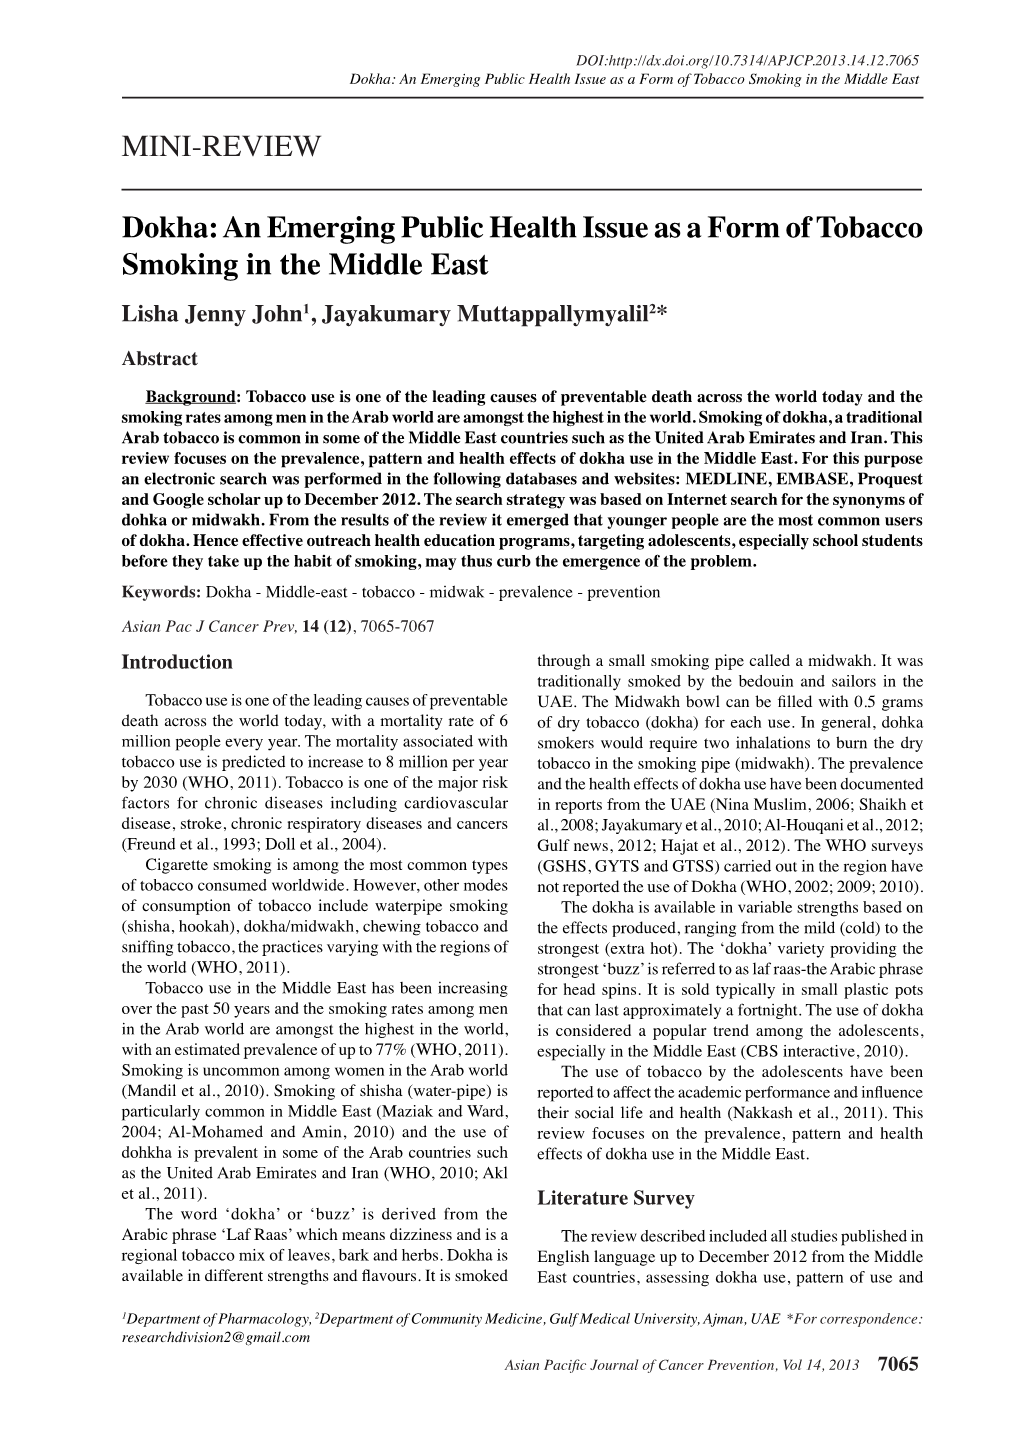 MINI-REVIEW Dokha: an Emerging Public Health Issue As a Form Of